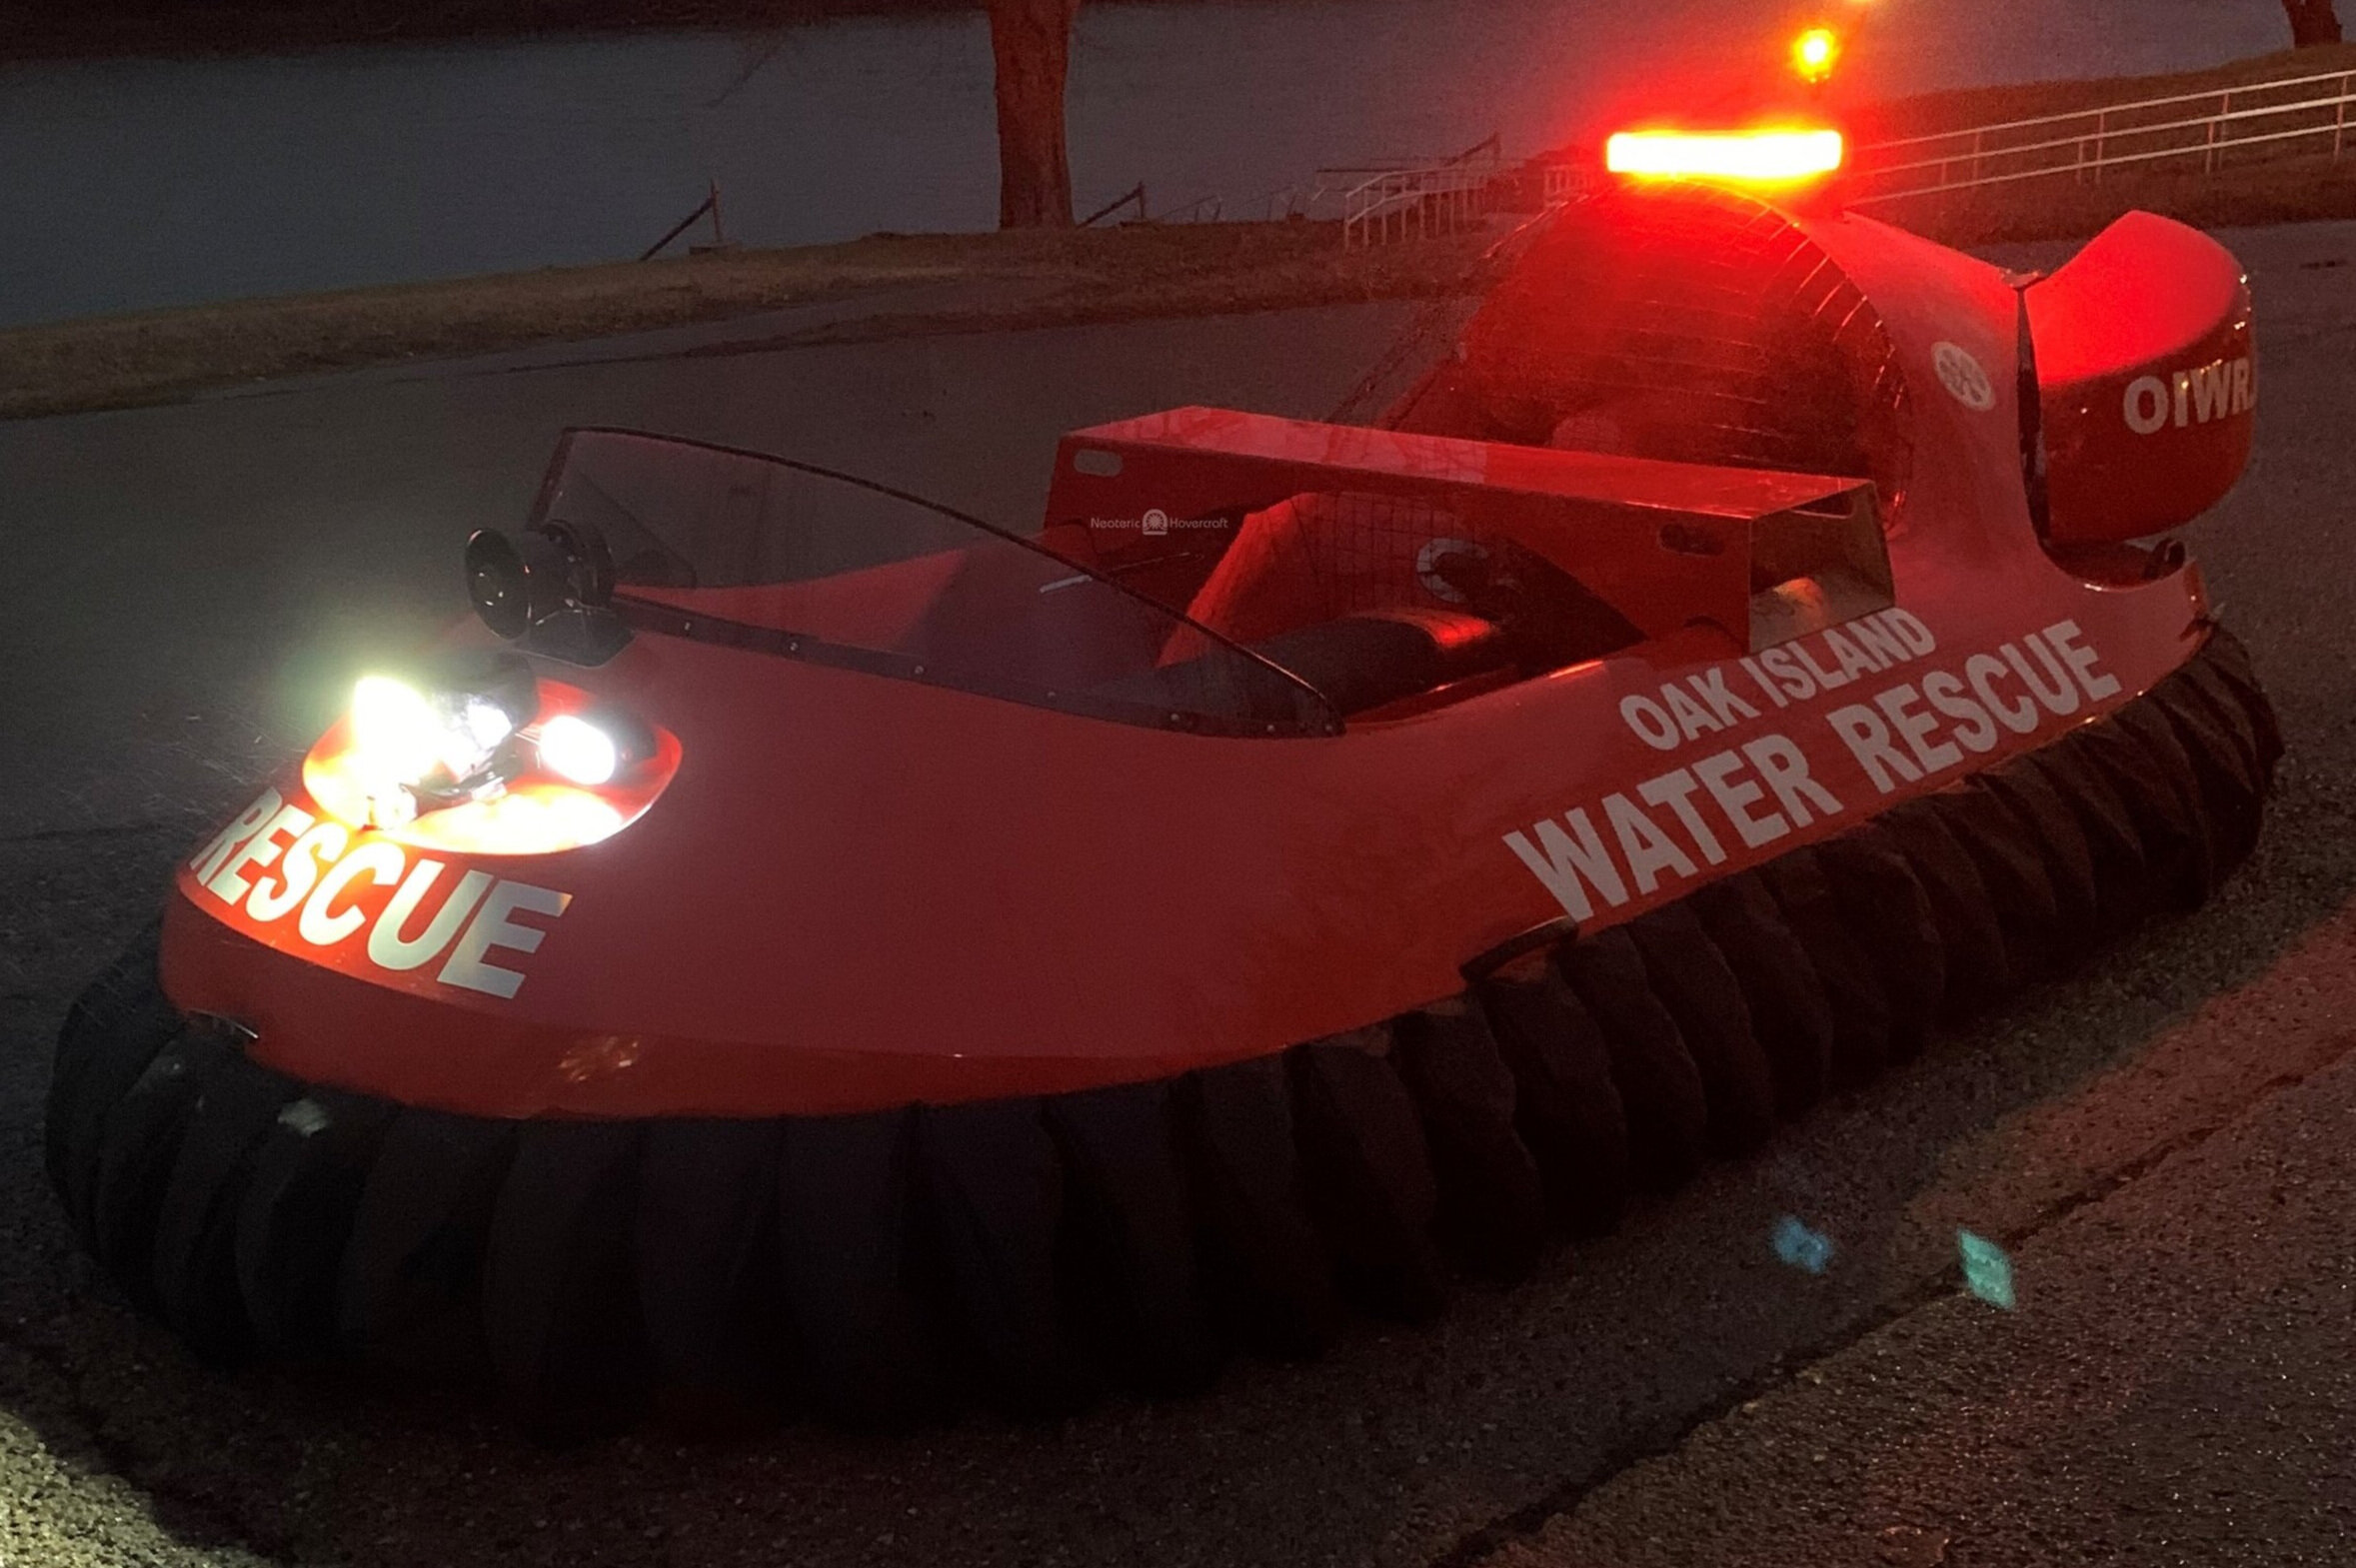 Oak Island Water Rescue ready to make rescues with new hovercraft   - WECT6 NewsAfter months of training, Oak Island Water Rescue is ready to conduct rescues with their newest vehicle: a hovercraft..READ ARTICLE